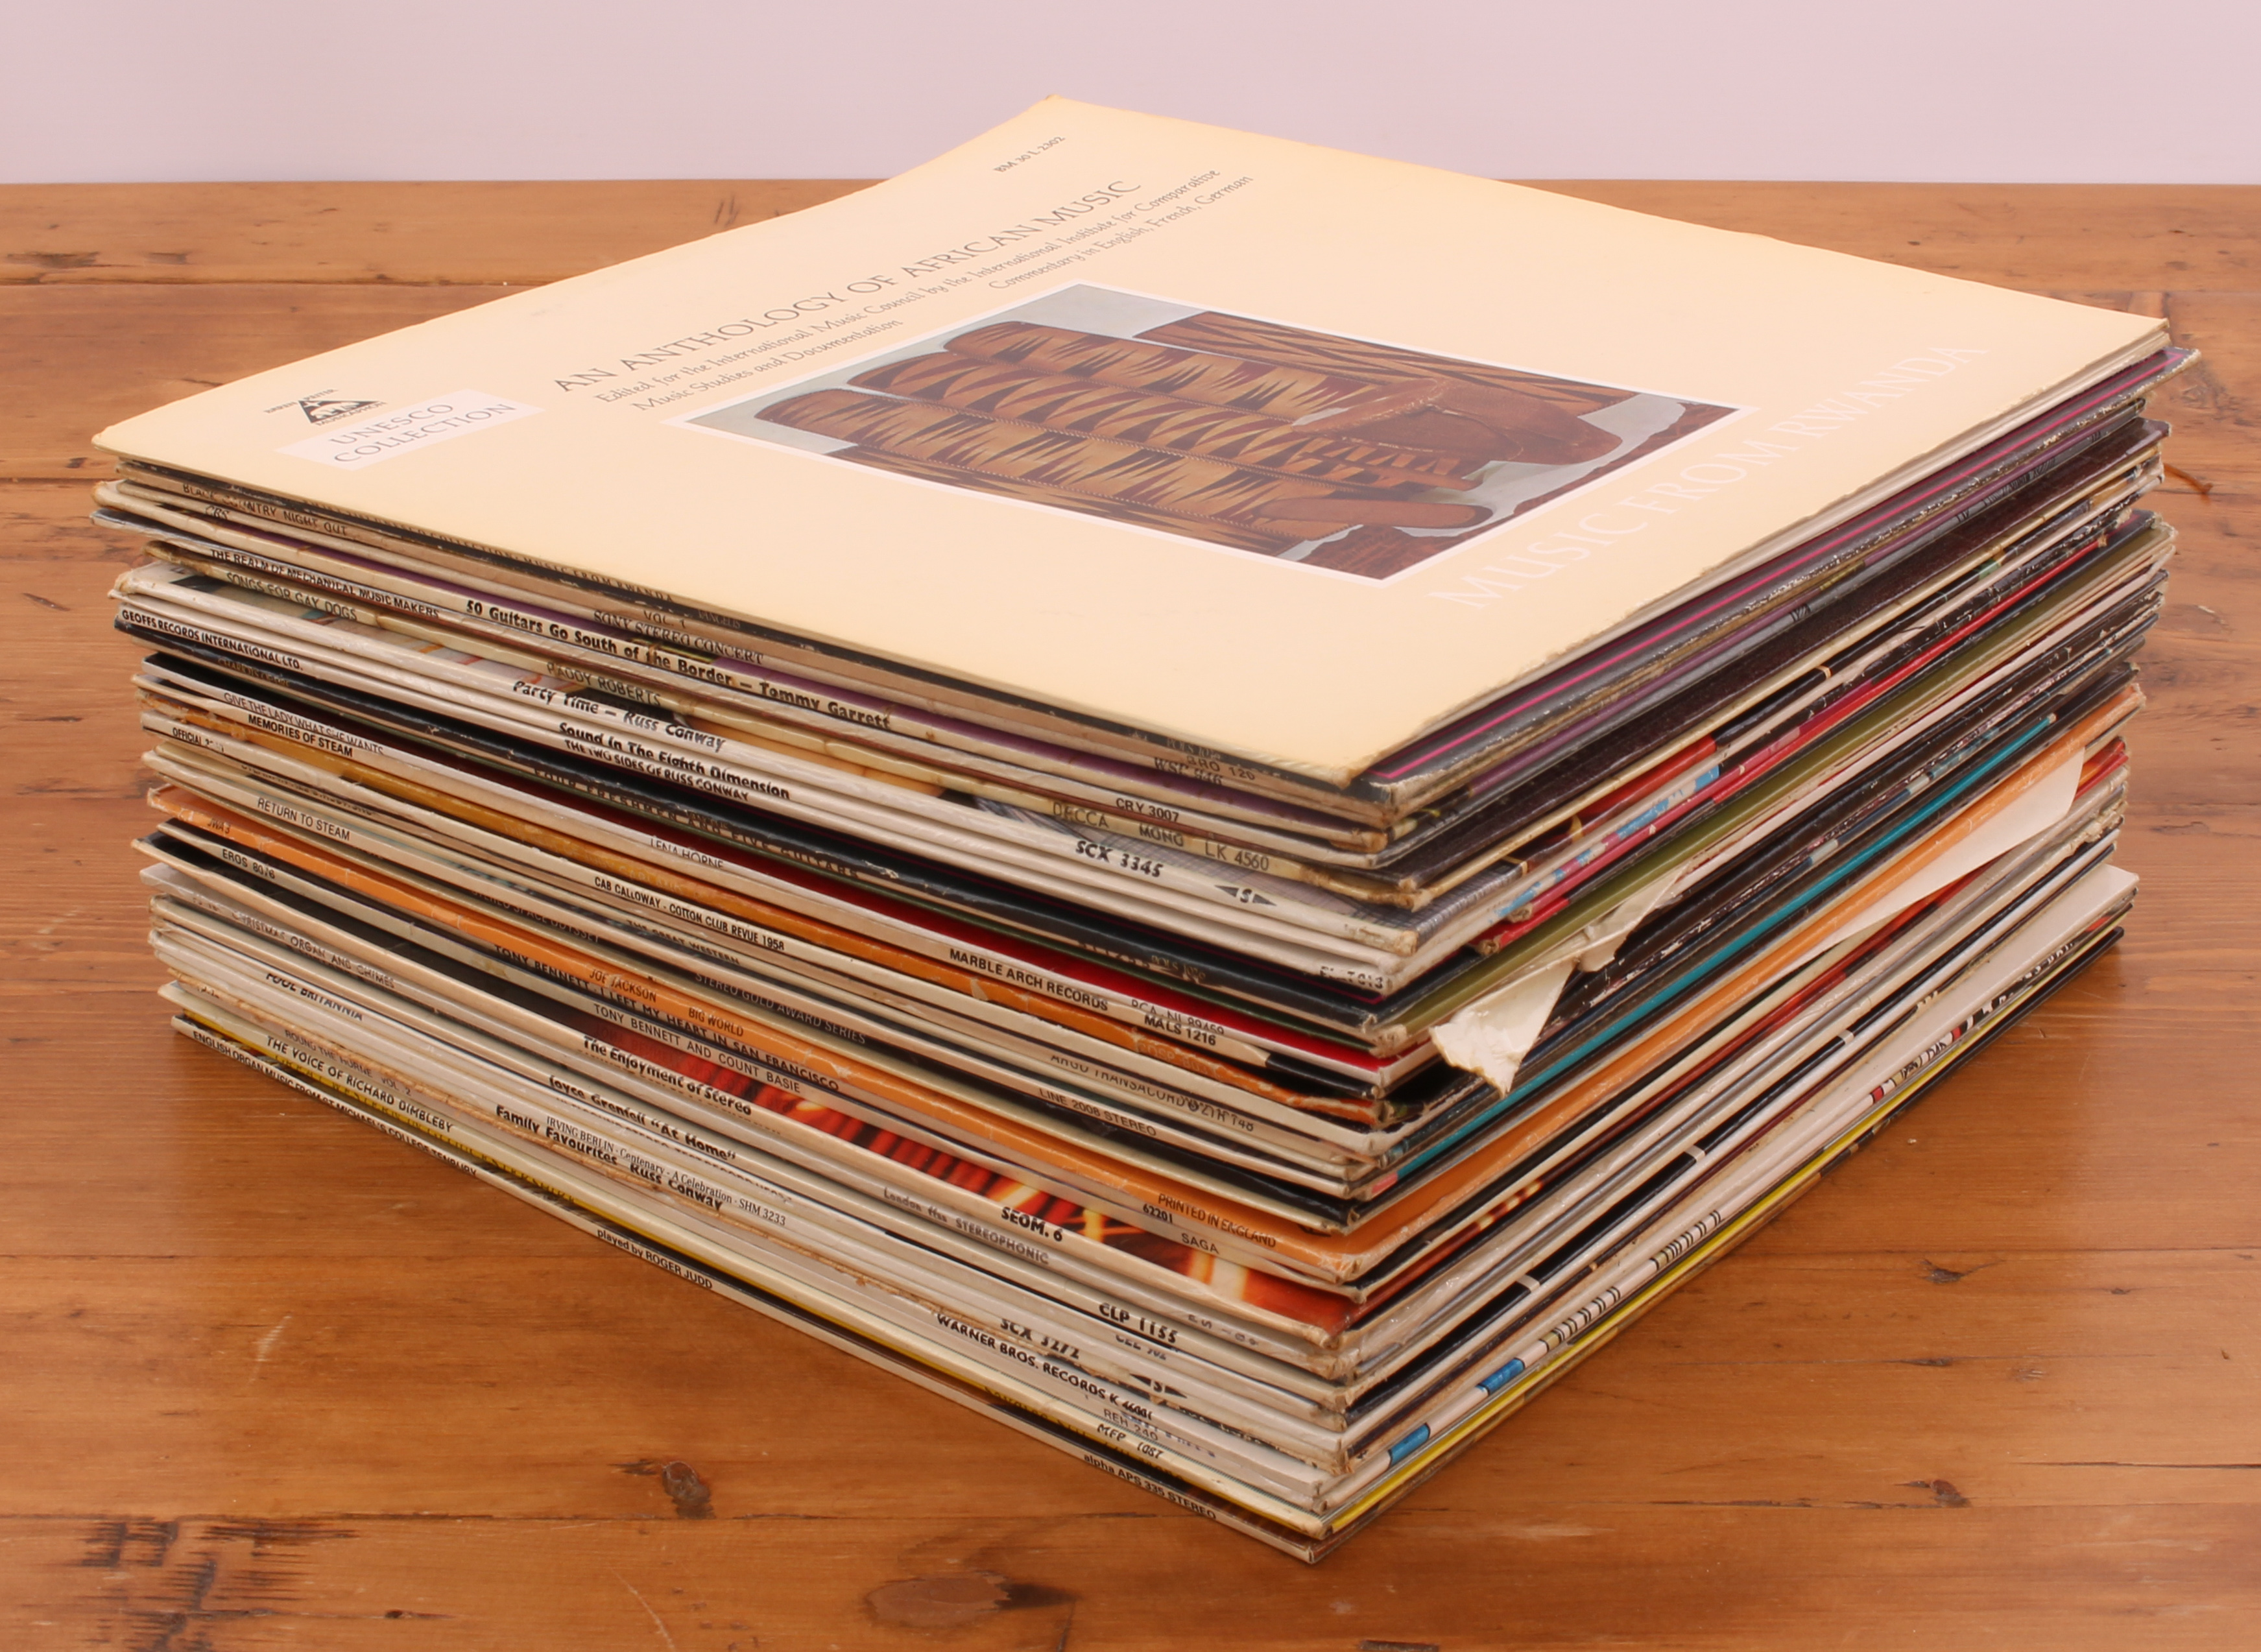 Over 100 spoken word/exotica/stereo test records/comedy albums and box sets. Condition: VG+ - Image 5 of 5